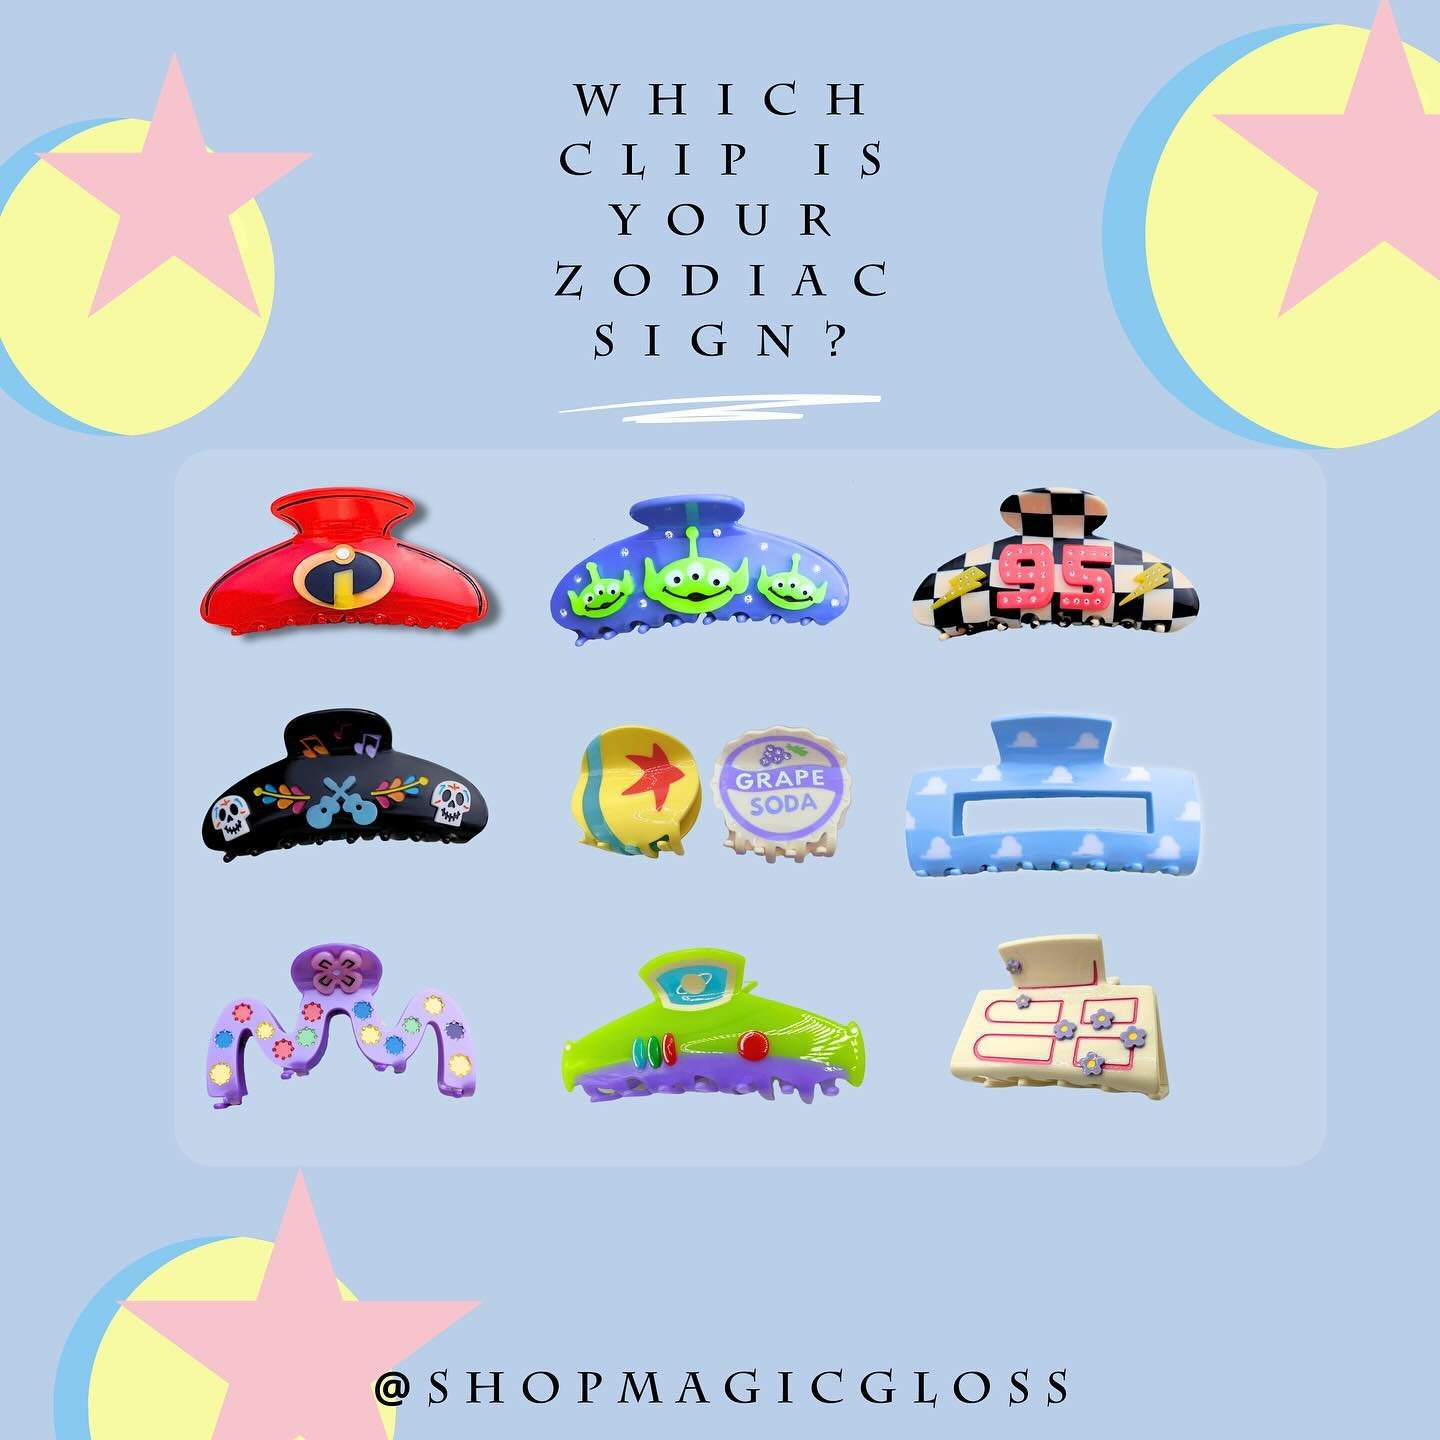 Which claw clip from our friendship fun collection is your zodiac sign?? 
&bull;
&bull;
&bull;
#pixar #pixarzodiac #zodiacsignsmemes #zodiacsignmemes #zodiacsignsart #pixarfest #pixaraszodiac